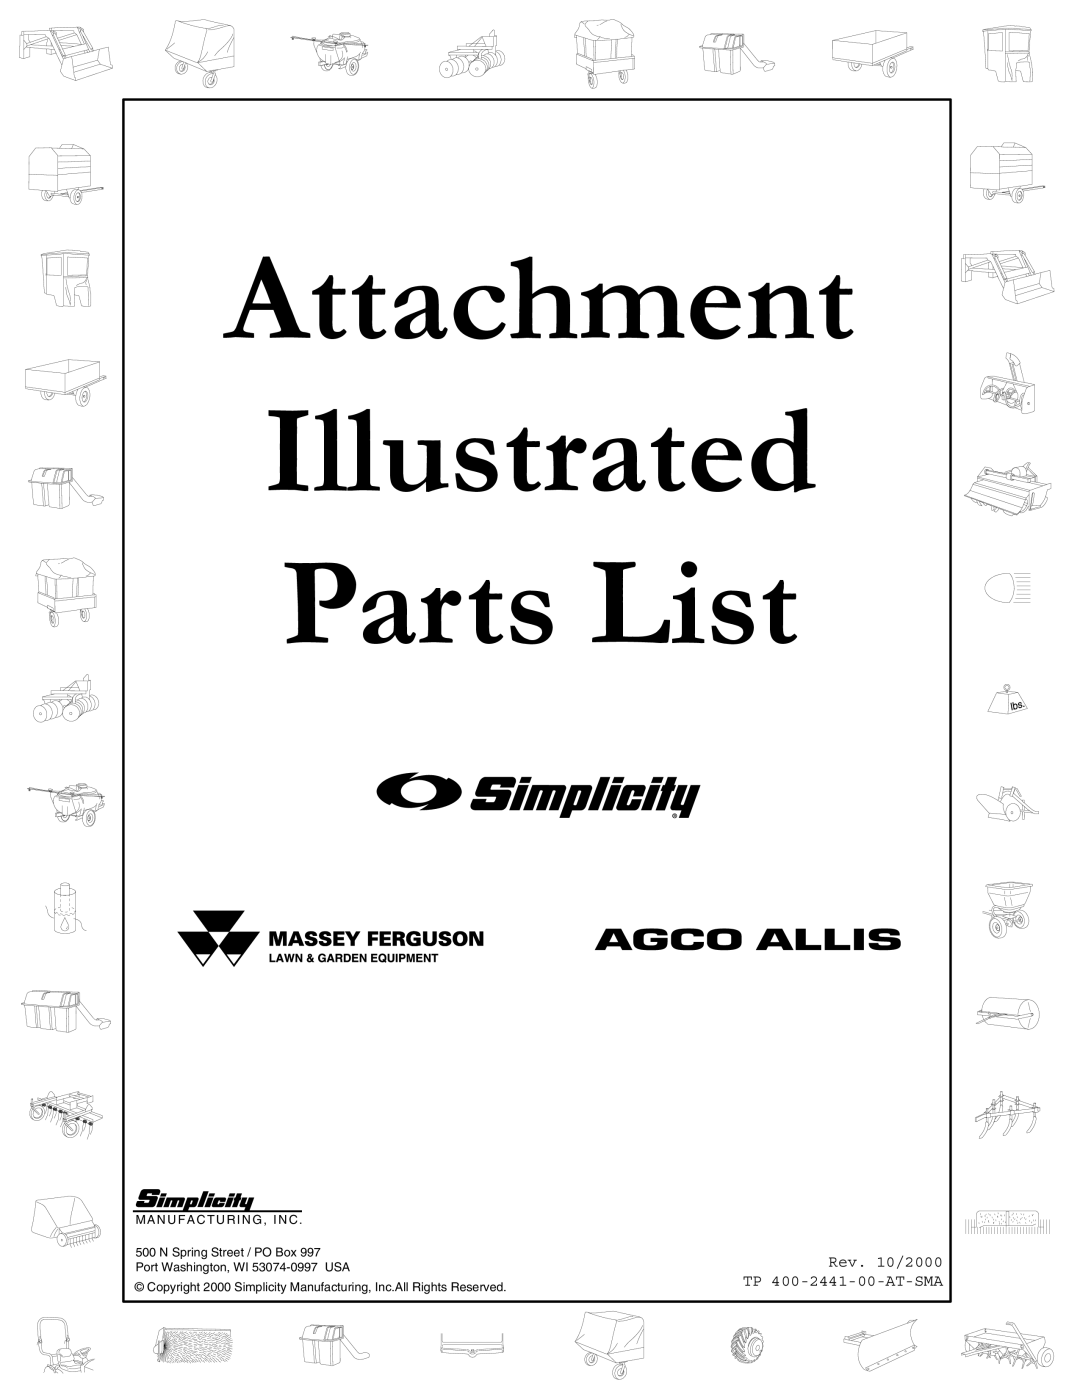 Simplicity 1692149 manual Attachment Illustrated Parts List, Rev. 10/2000 TP 400-2441-00-AT-SMA, N Spring Street / PO Box 